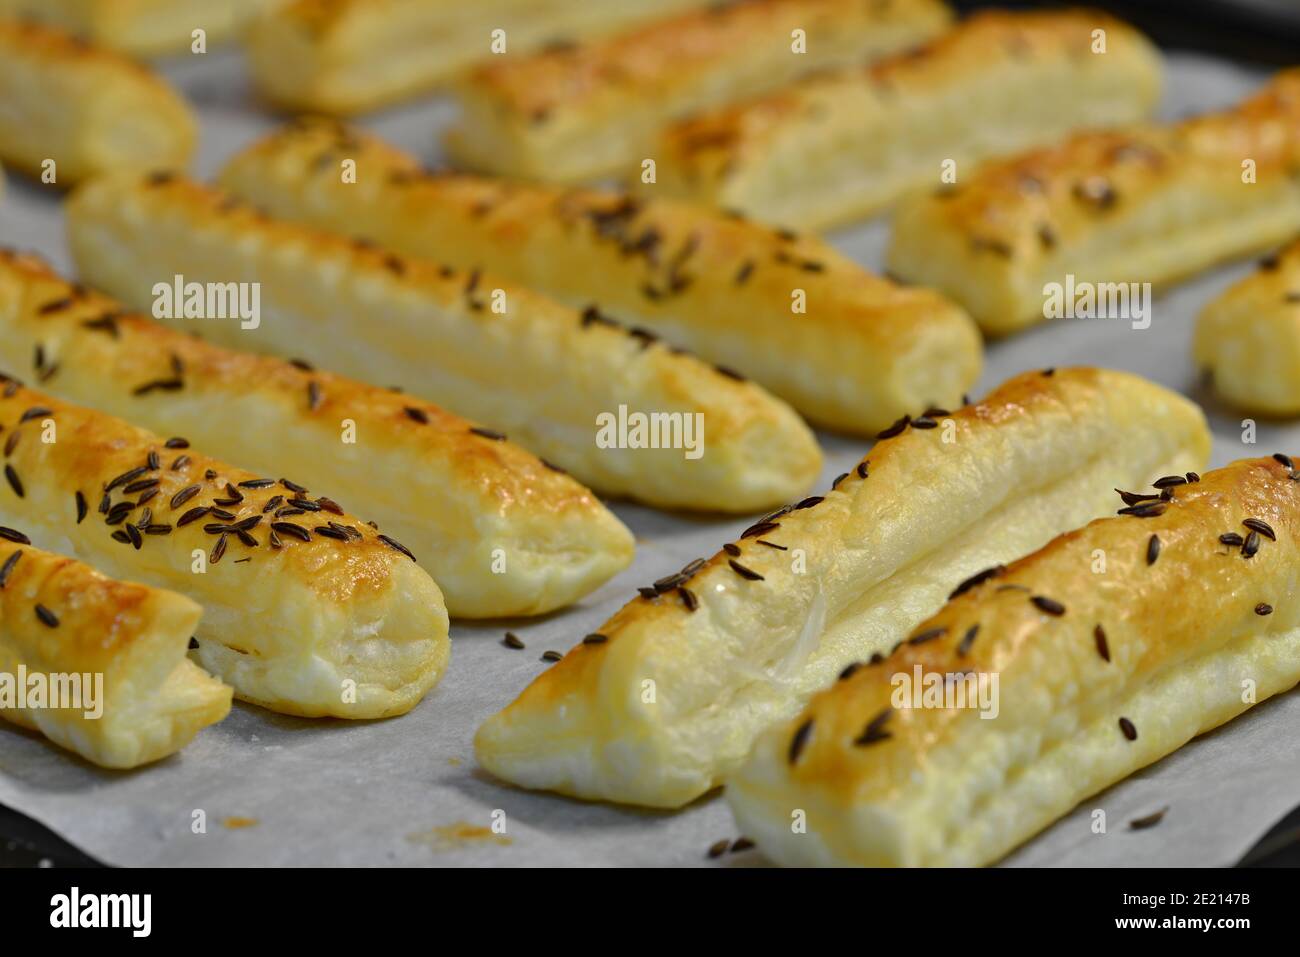 Baked salty sticks with salt and cumin. Golden baked savory pastry. Home baking appetizers. Crispy savory pastry on a baking sheet. Stock Photo